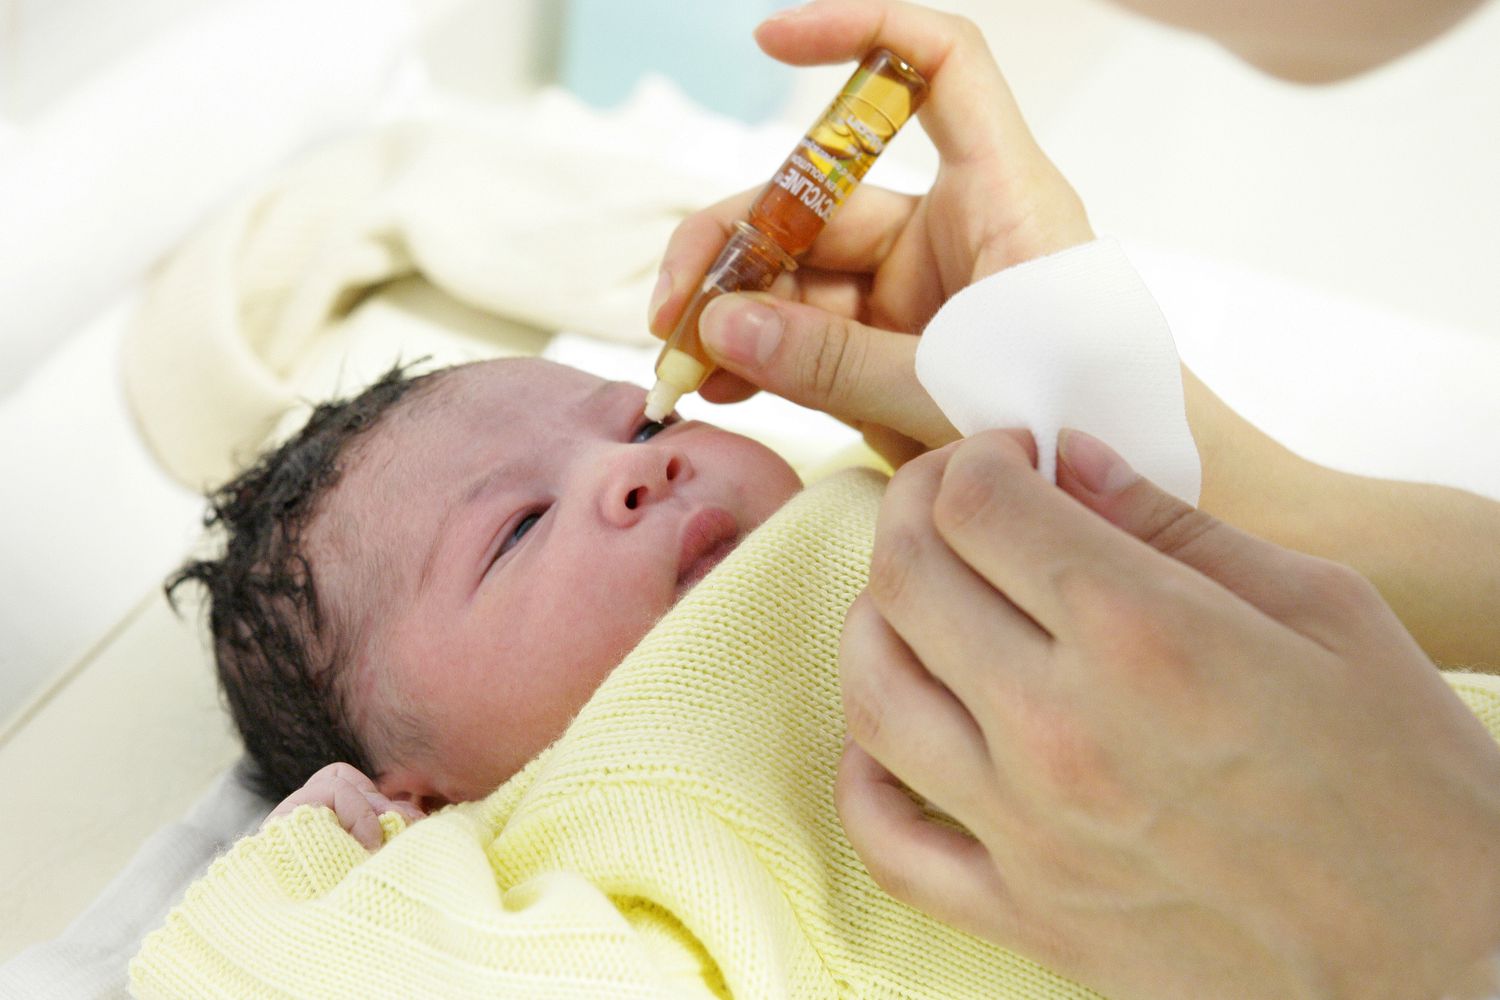 A nurse gently administers an injection to a baby. the pros of giving eye medicine to newborns.